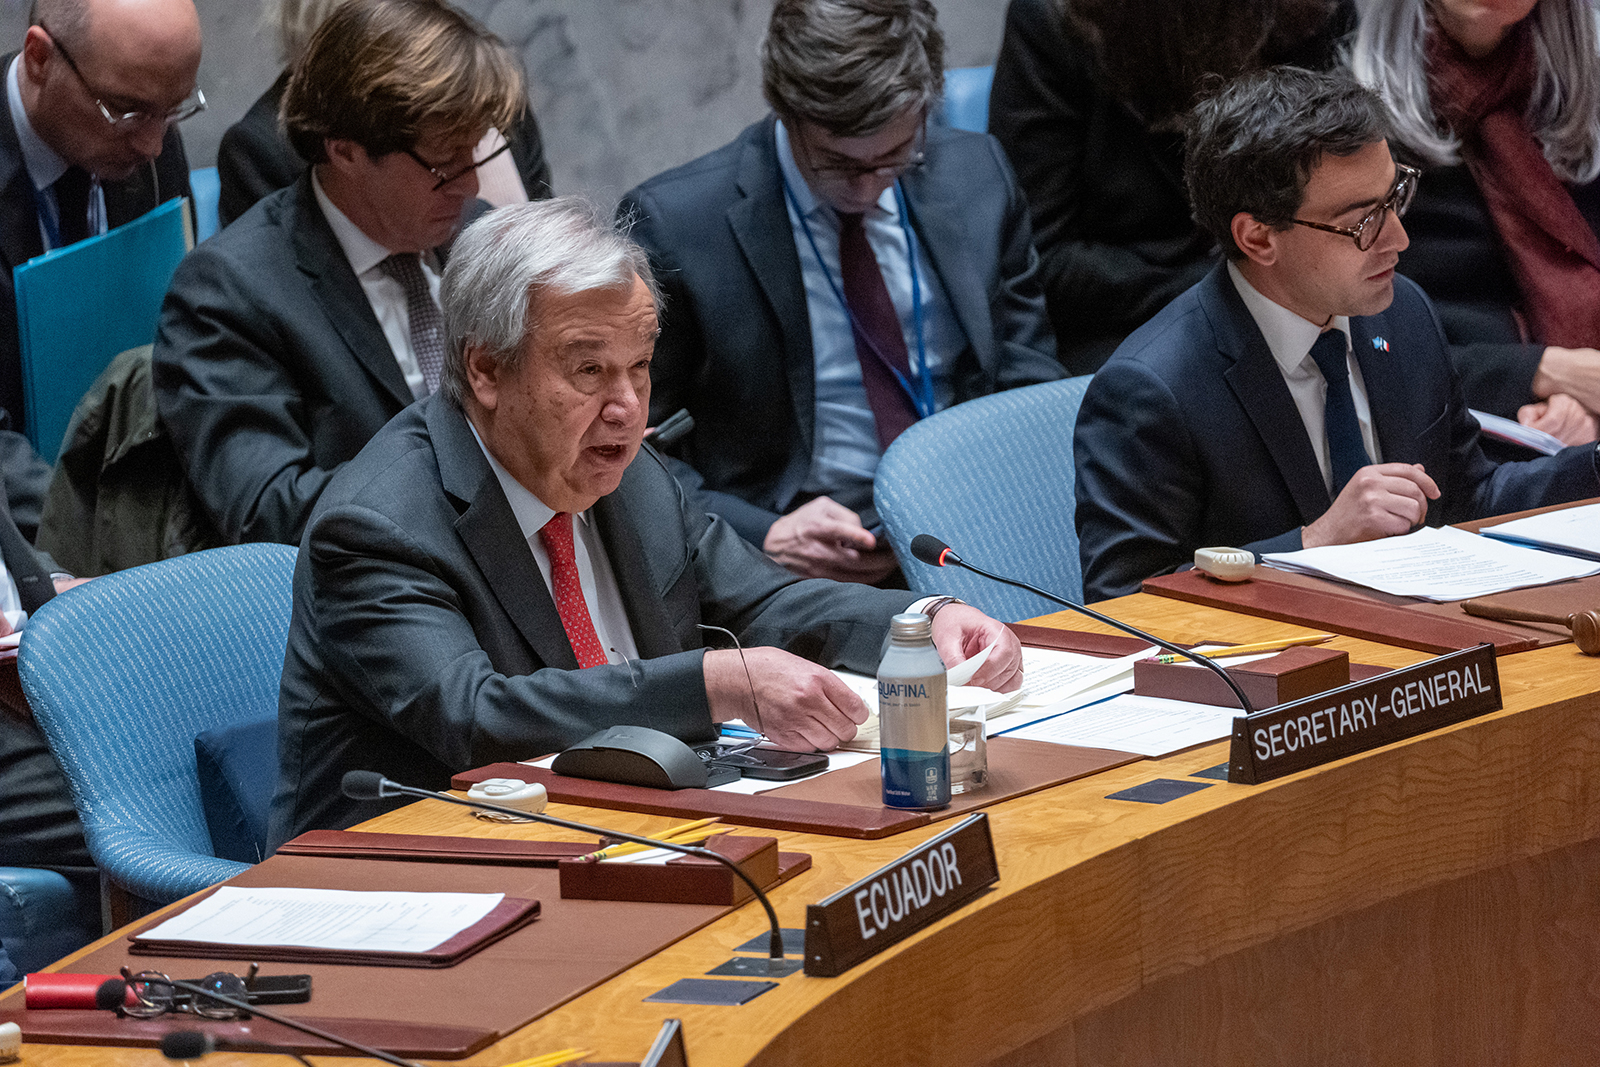 Antonio Guterres speaks at a United Nations Security Council (UNSC) meeting in New York City on January 23.